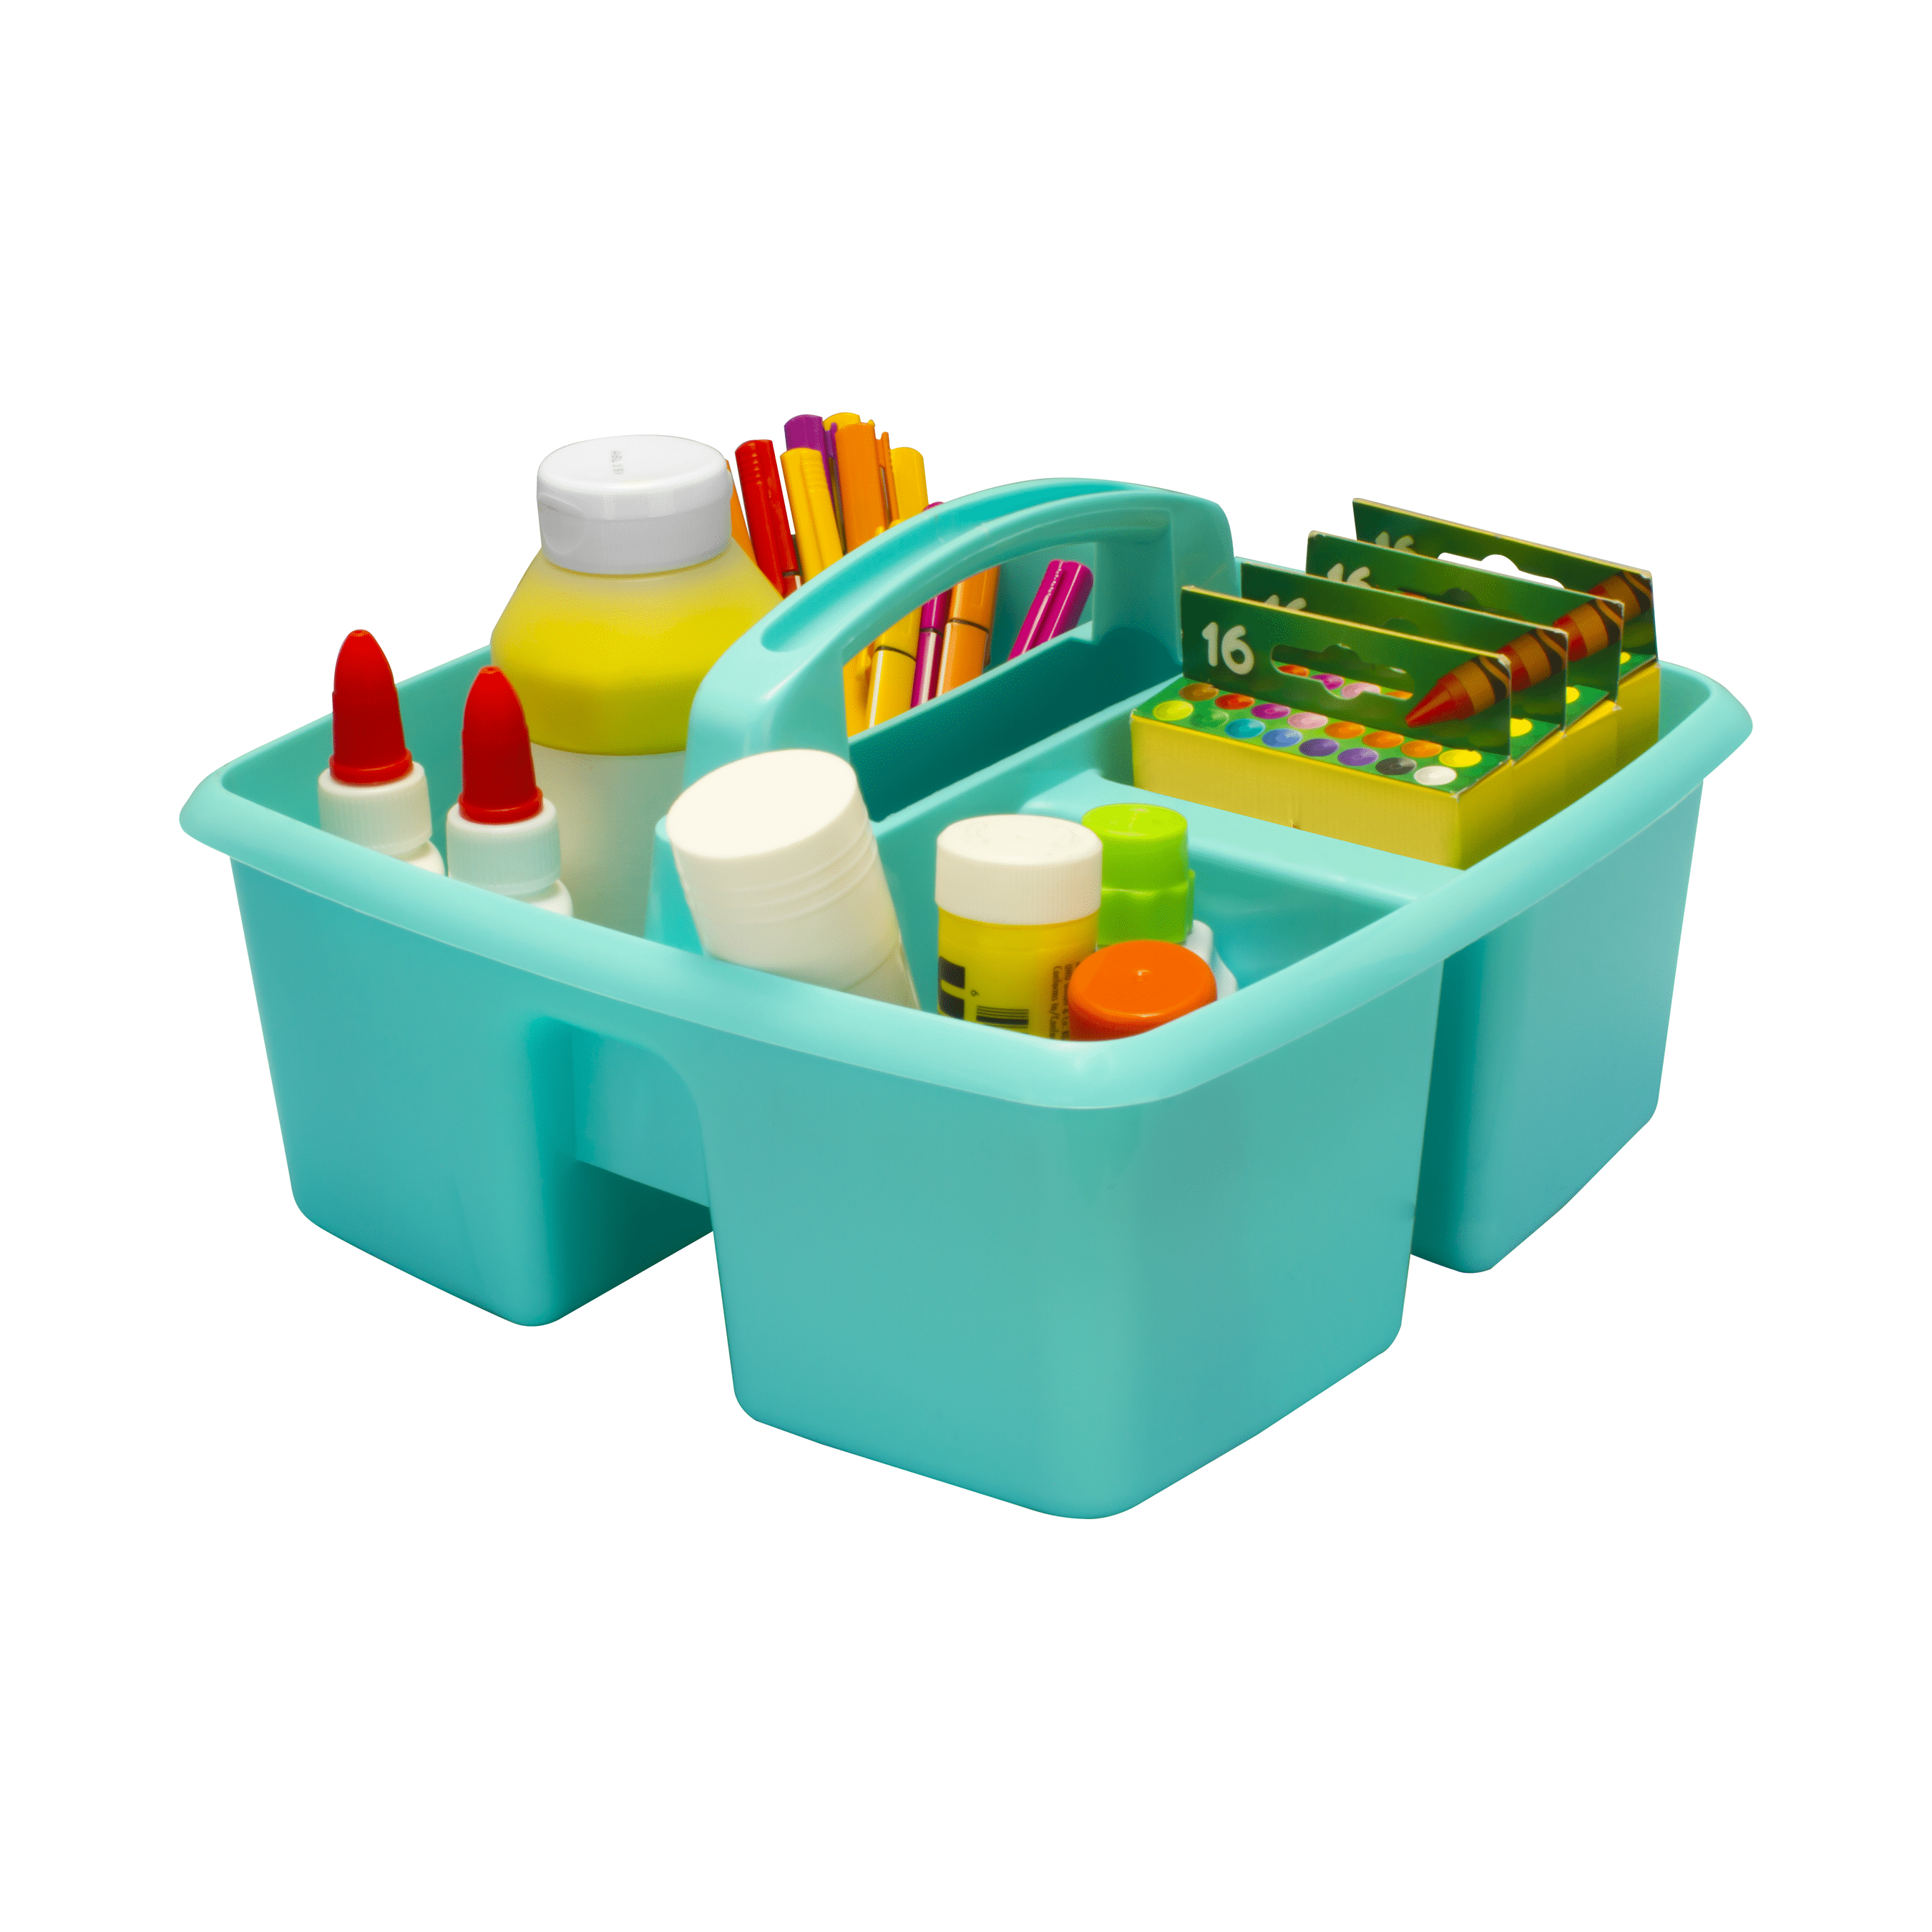 Thyle 12 Pieces Classroom Storage 6 Pcs Assorted Colors Classroom Caddy  Table Caddy for Classroom 6 Pcs Assorted Colors Paper Organizer Bins Book  Bins